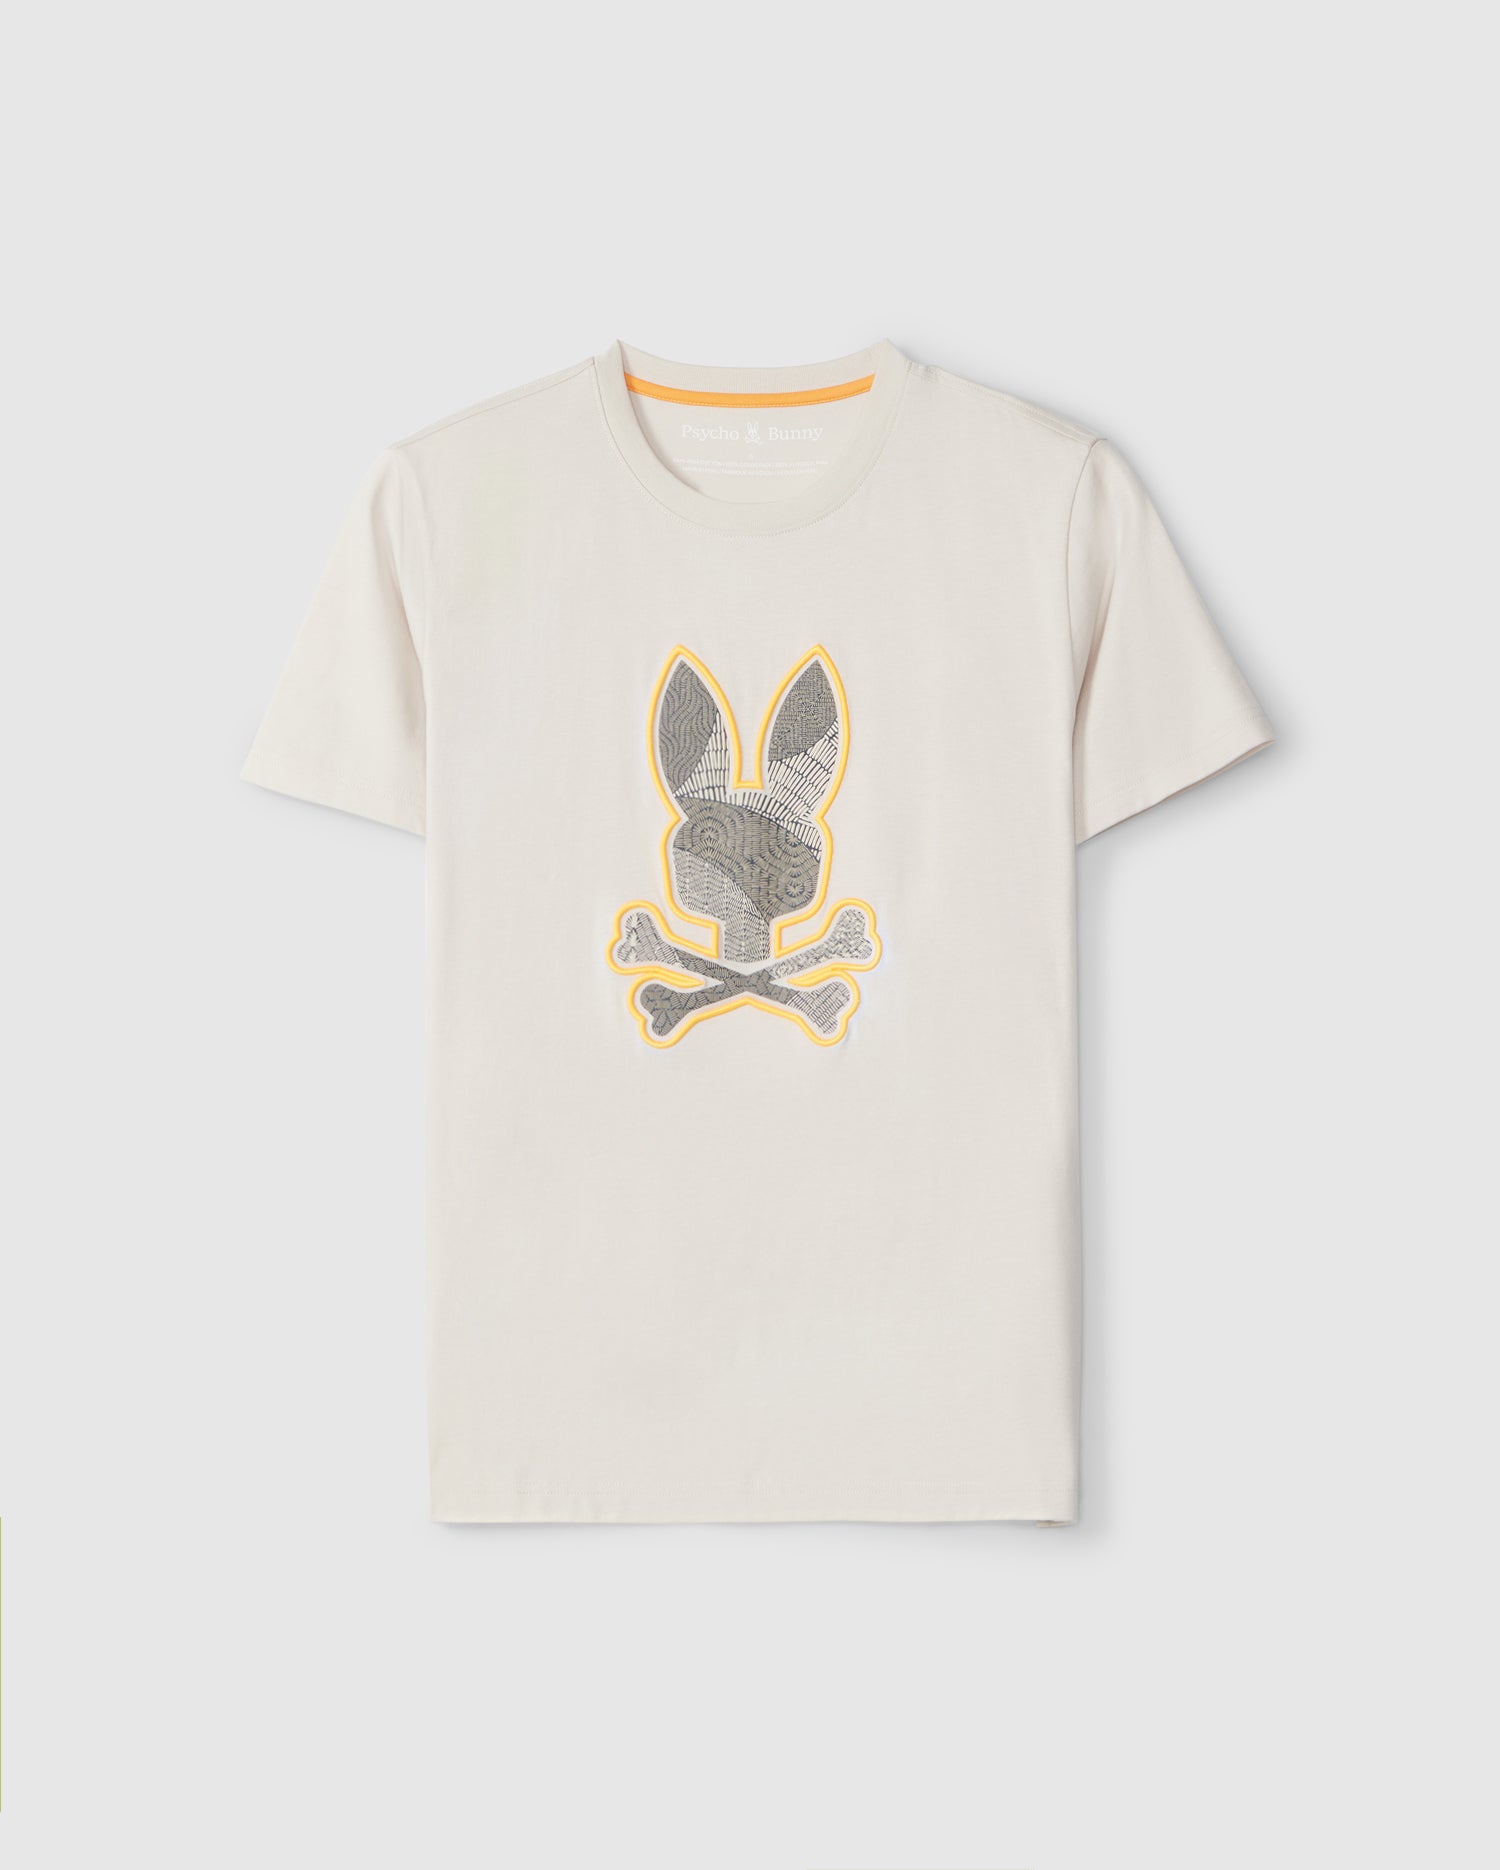 A plain light beige Pima cotton tee featuring an embroidered print on the front. The design includes a stylized bunny head with long ears and intricate patterns, placed above two crossed bones. The artwork is outlined in yellow, contrasting with the shirt's neutral tone. This is the MENS LENOX EMBROIDERED GRAPHIC TEE - B6U405B200 by Psycho Bunny.